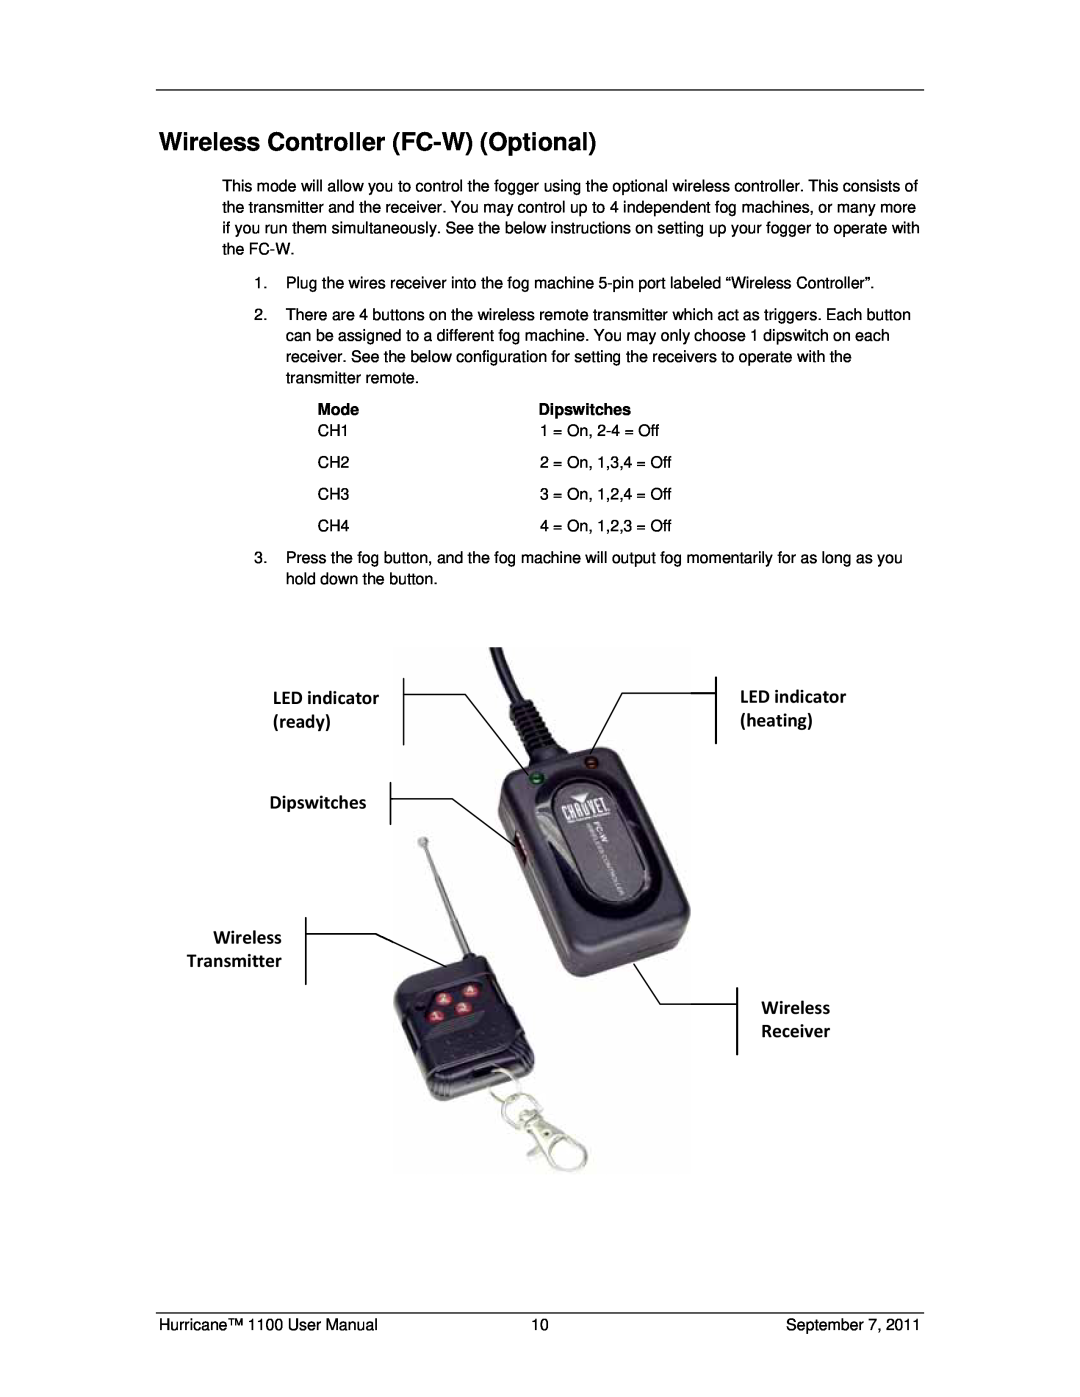 Chauvet 1100 user manual Wireless Controller FC-WOptional, LED indicator ready Dipswitches Wireless, Transmitter, Mode 